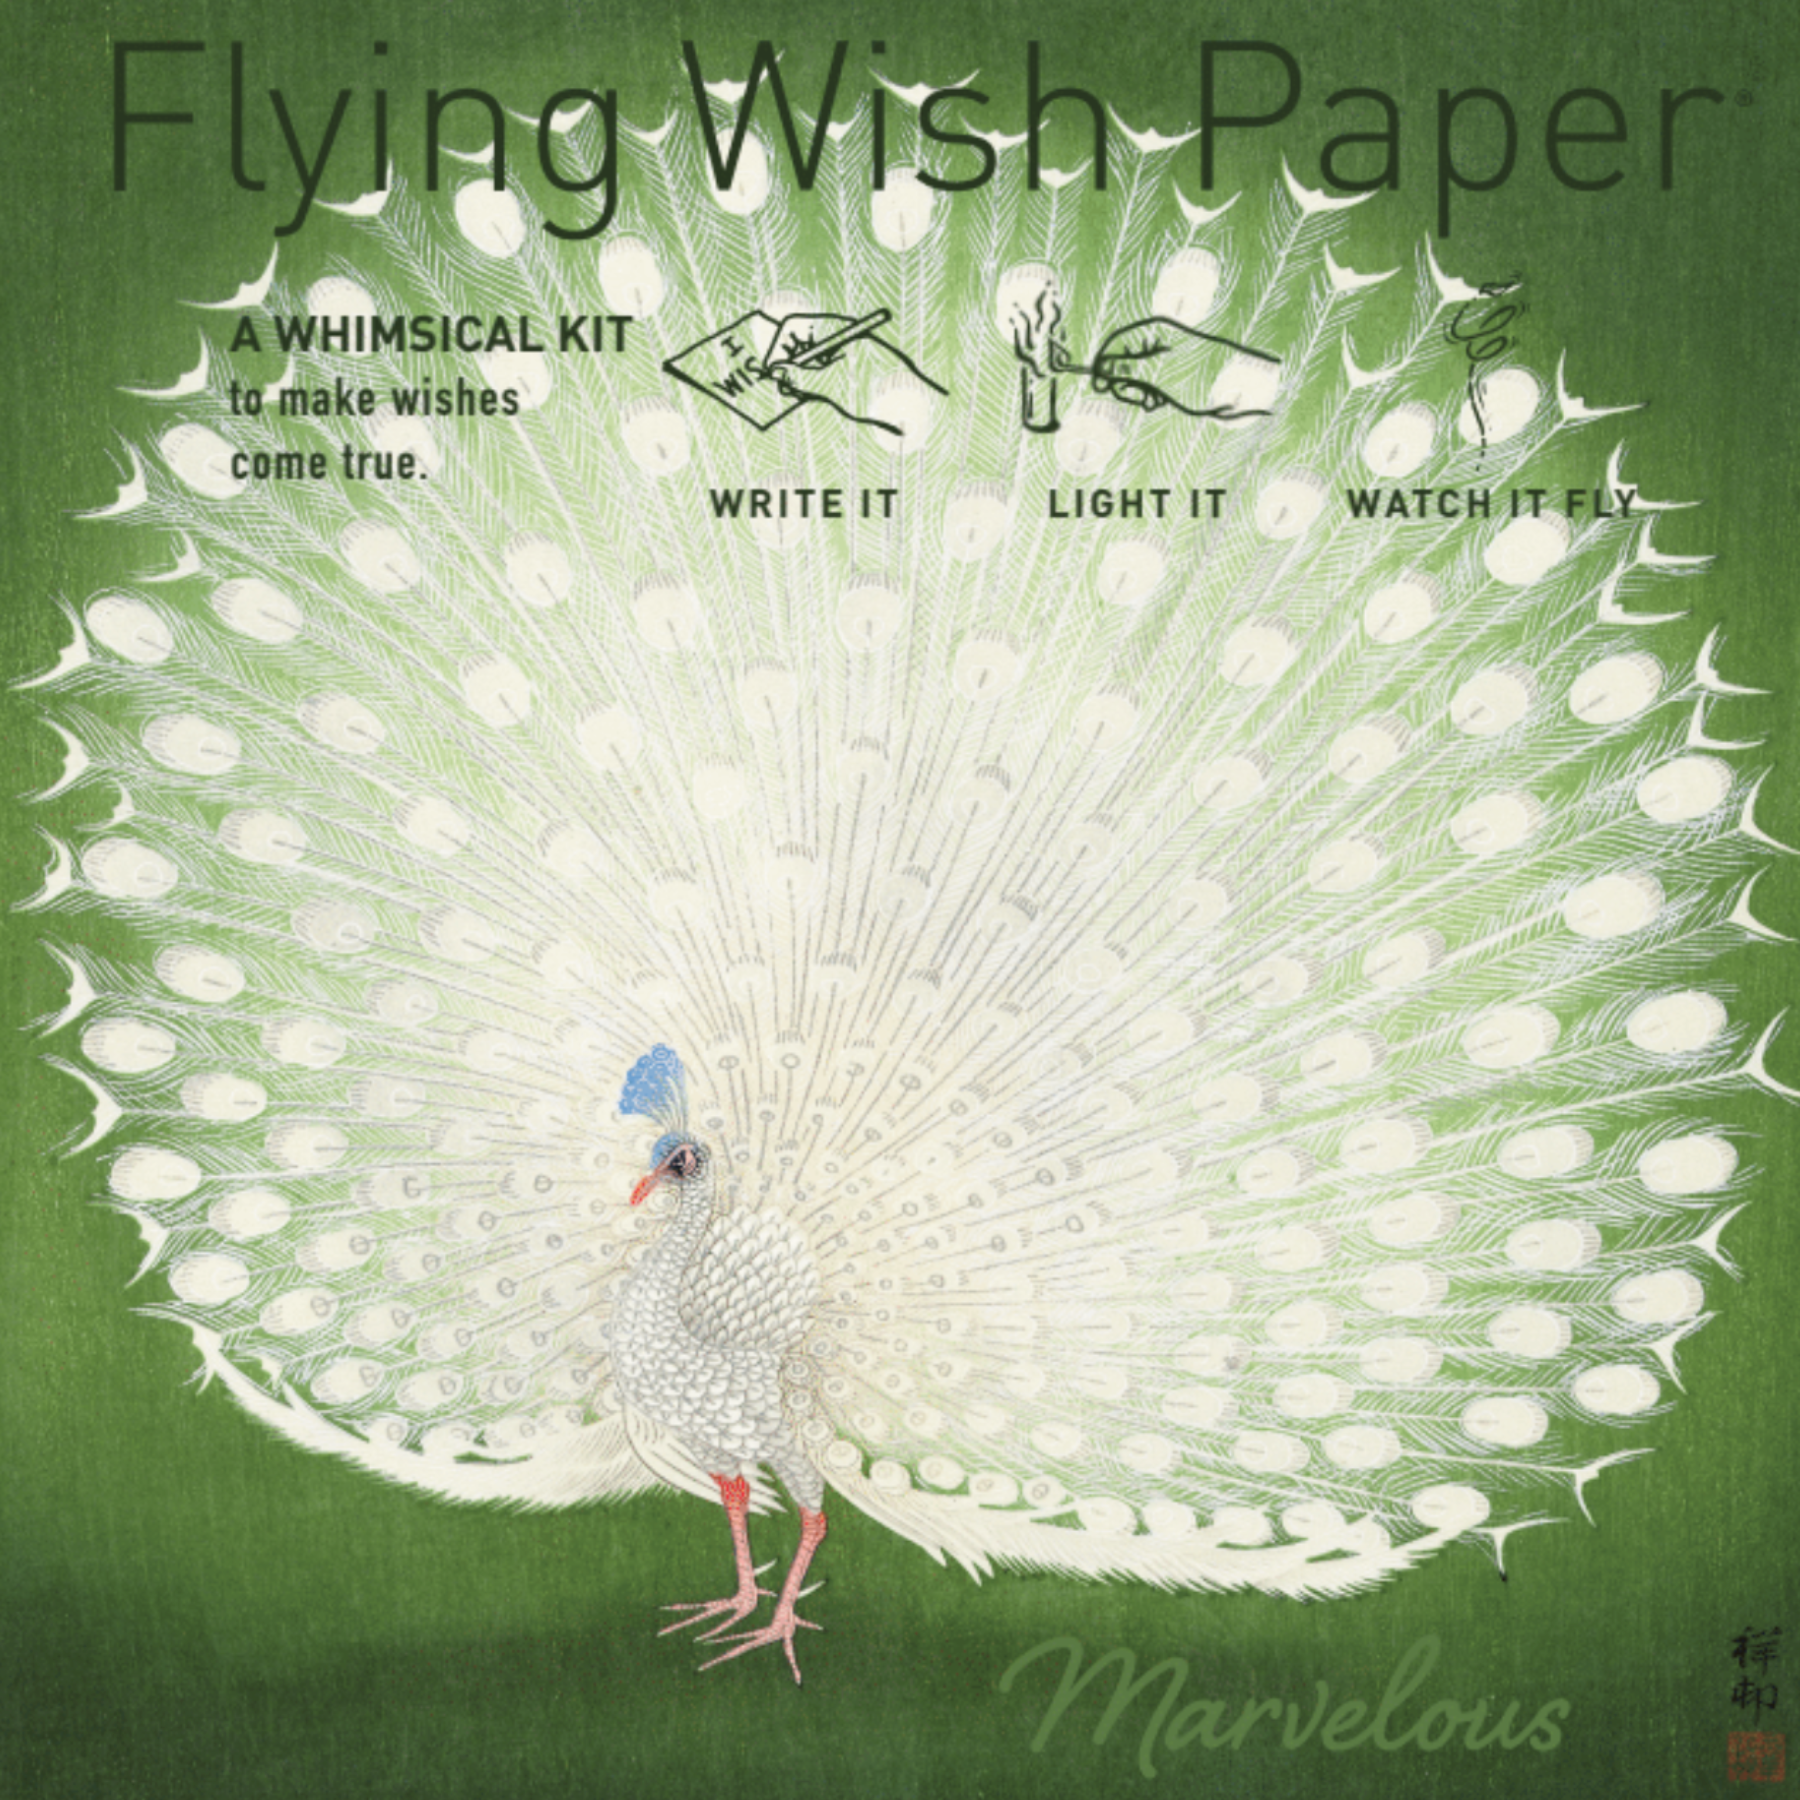 Flying Wish Paper | Butterfly